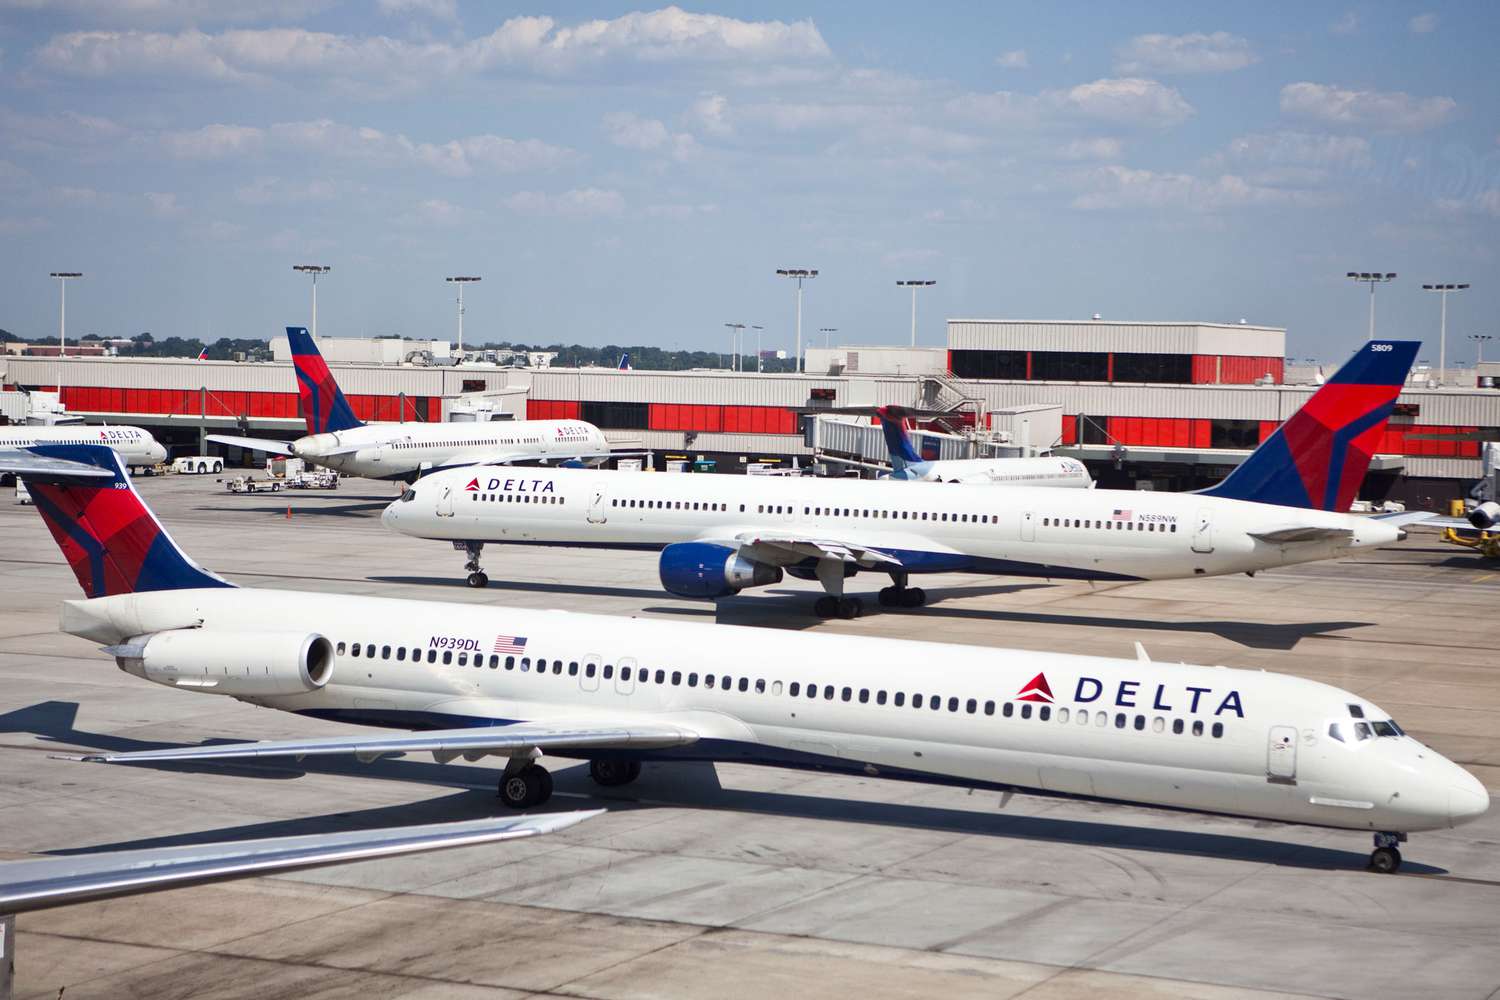 Delta became the best airline company according to WSJ version